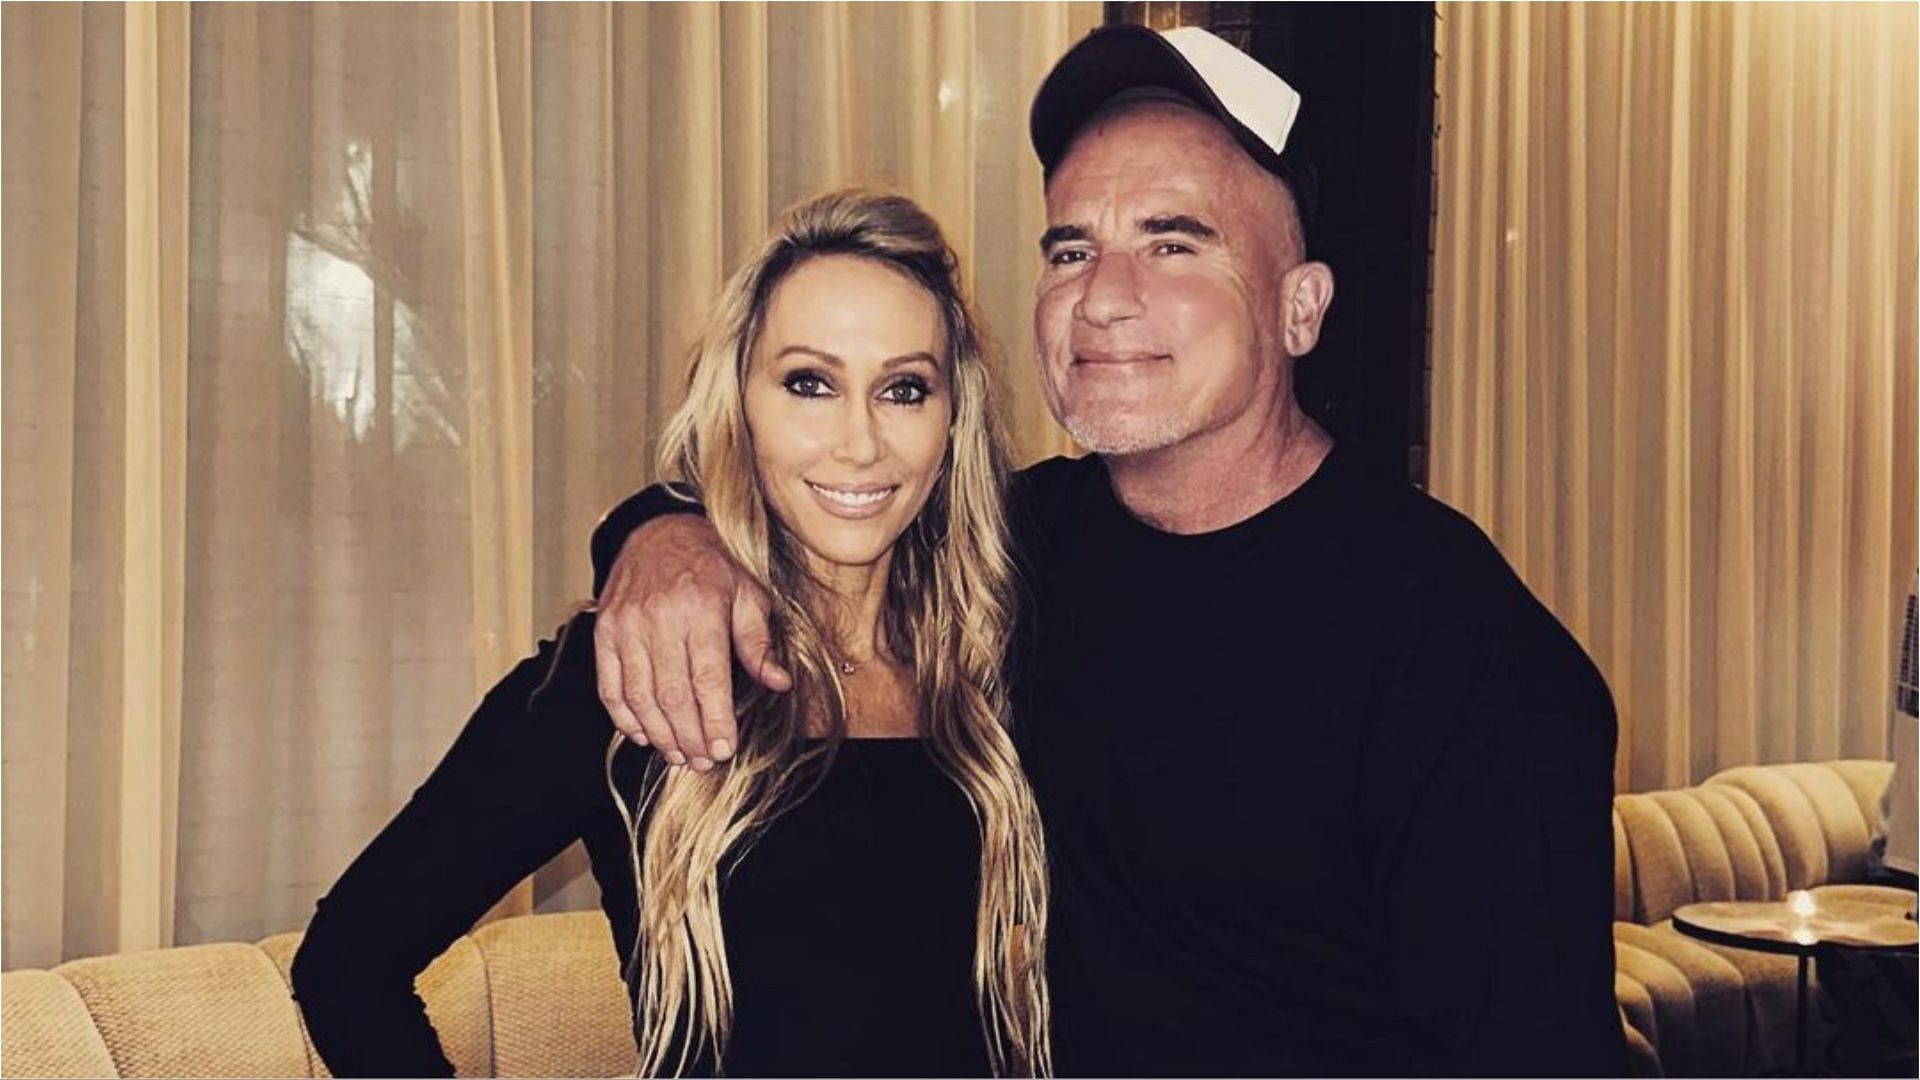 Tish Cyrus and Dominic Purcell are engaged now (Image via tishcyrus/Instagram)